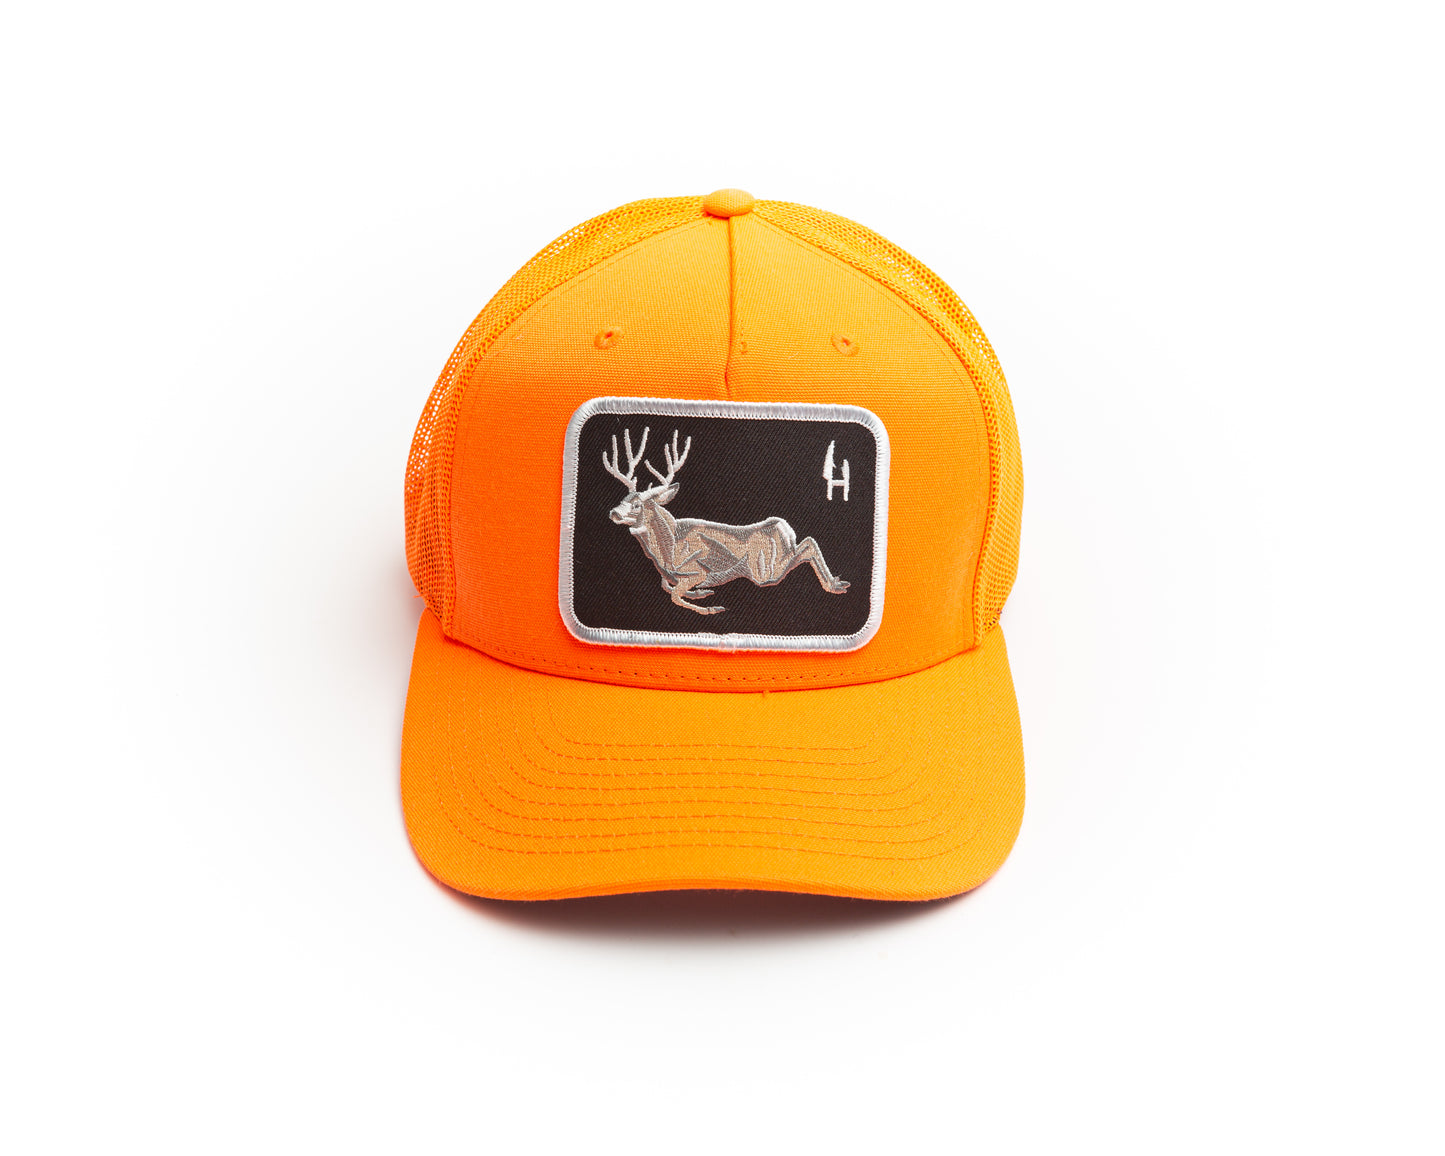 Hunt To Eat blaze orange trucker cap decorated with a beautiful embroidered patch of a bounding Mule deer buck. The patch has a black twill background with white merrowed border. The hat is a richardson blaze orange trucker mesh snap back. Perfect for use during gun season, safety orange.